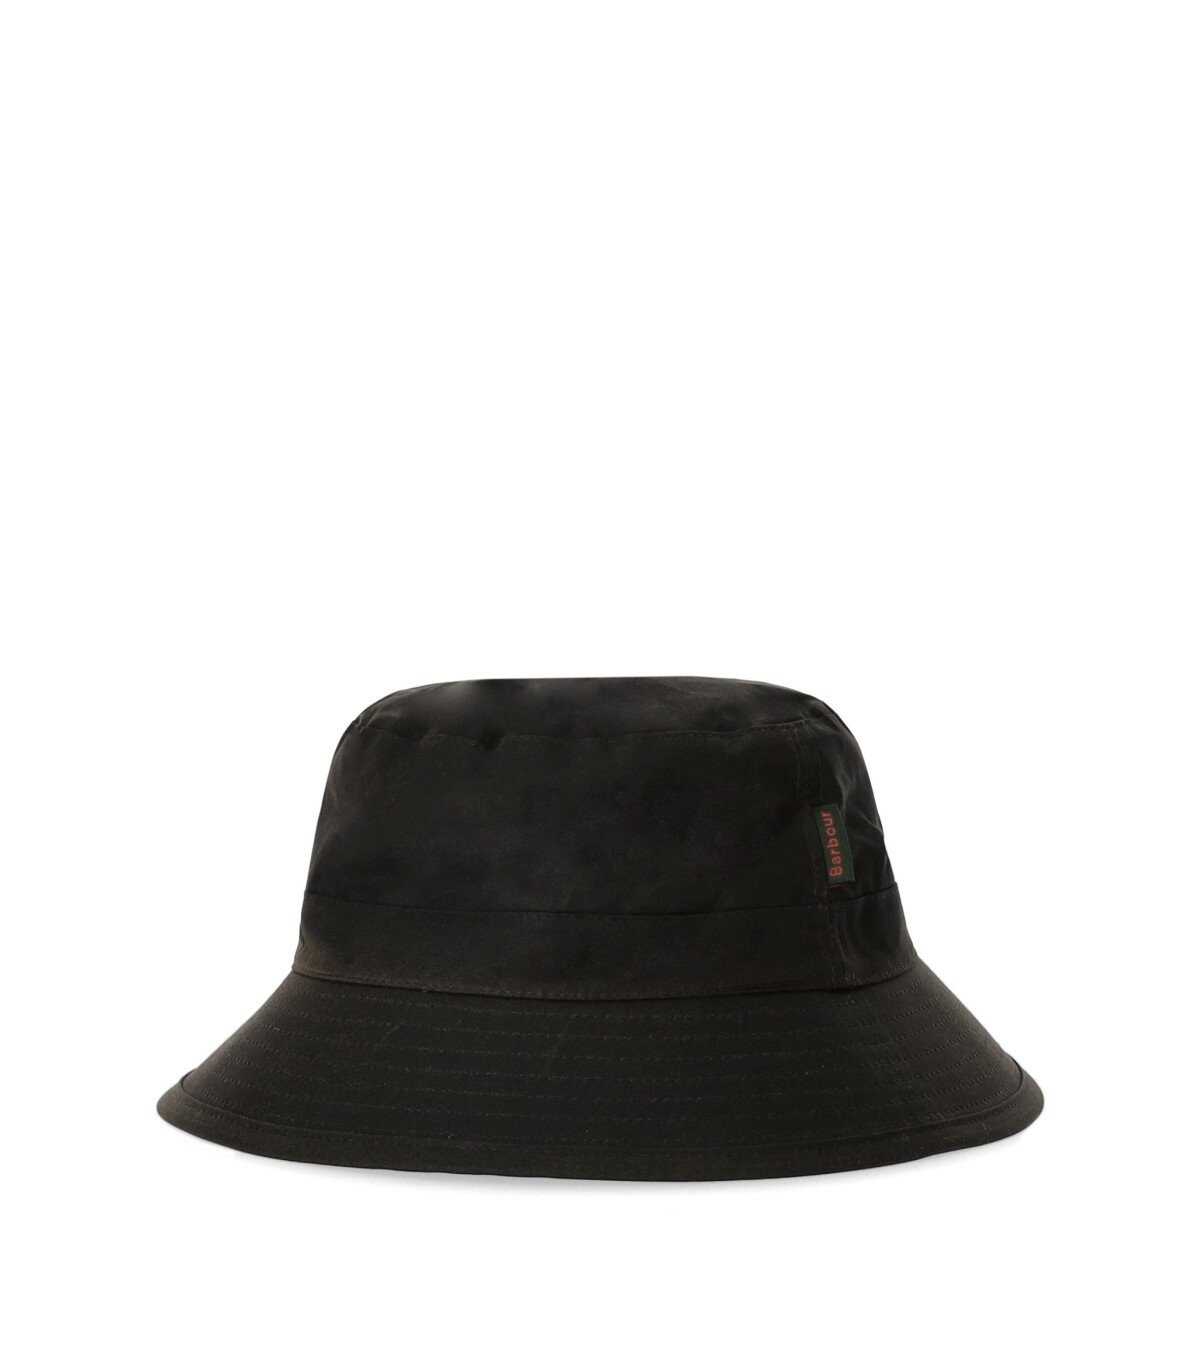 Barbour BARBOUR WAX SPORTS OLIVE GREEN BUCKET HAT Green